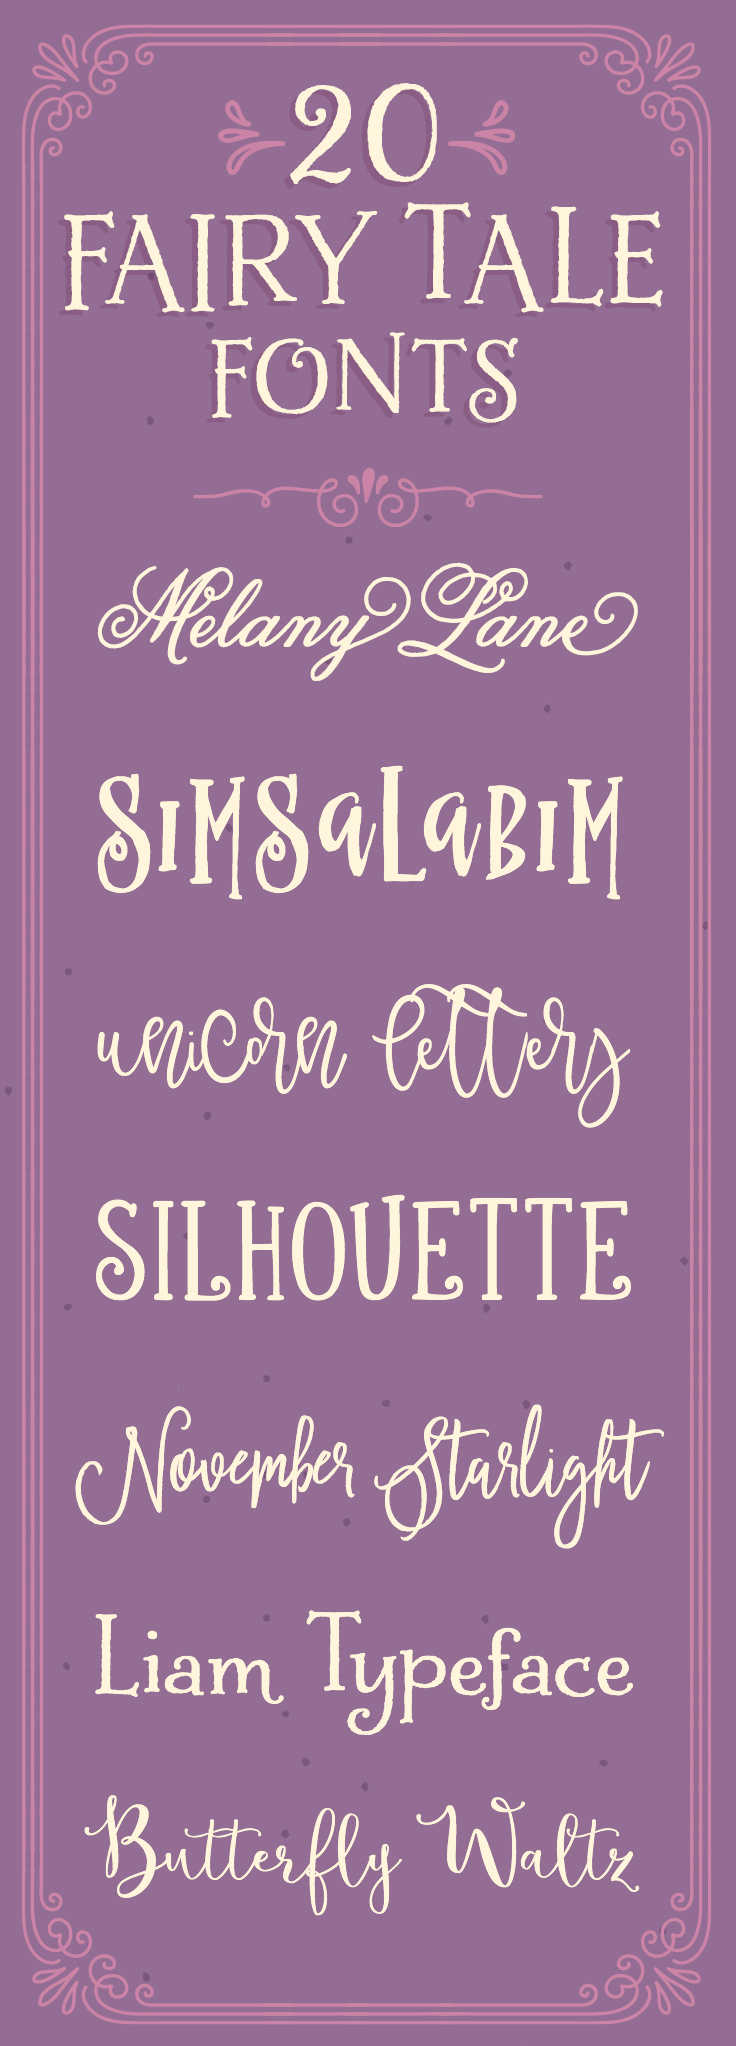 Whimsical Fonts That Look Like They Re Straight Out Of A Fairy Tale Creative Market Blog